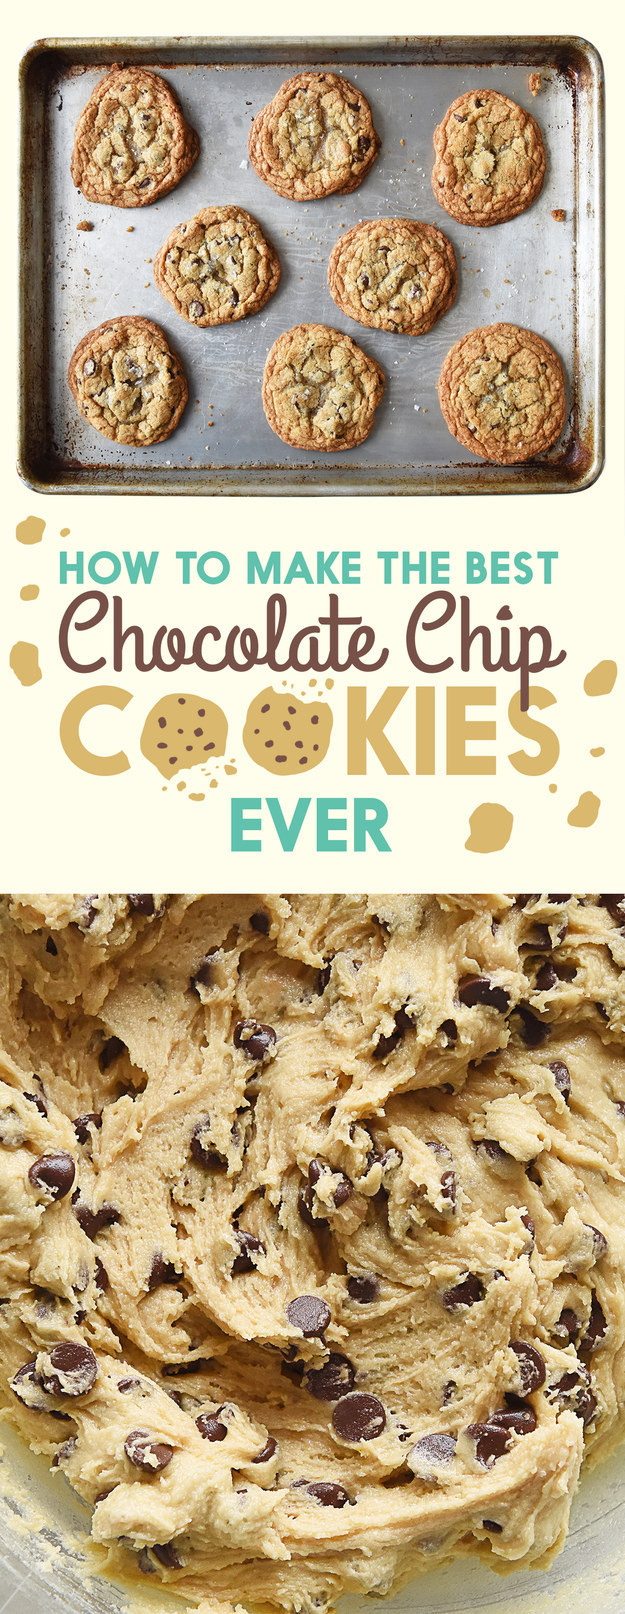 Buzzfeed Best Chocolate Chip Cookies
 How To Make The Best Chocolate Chip Cookies Ever